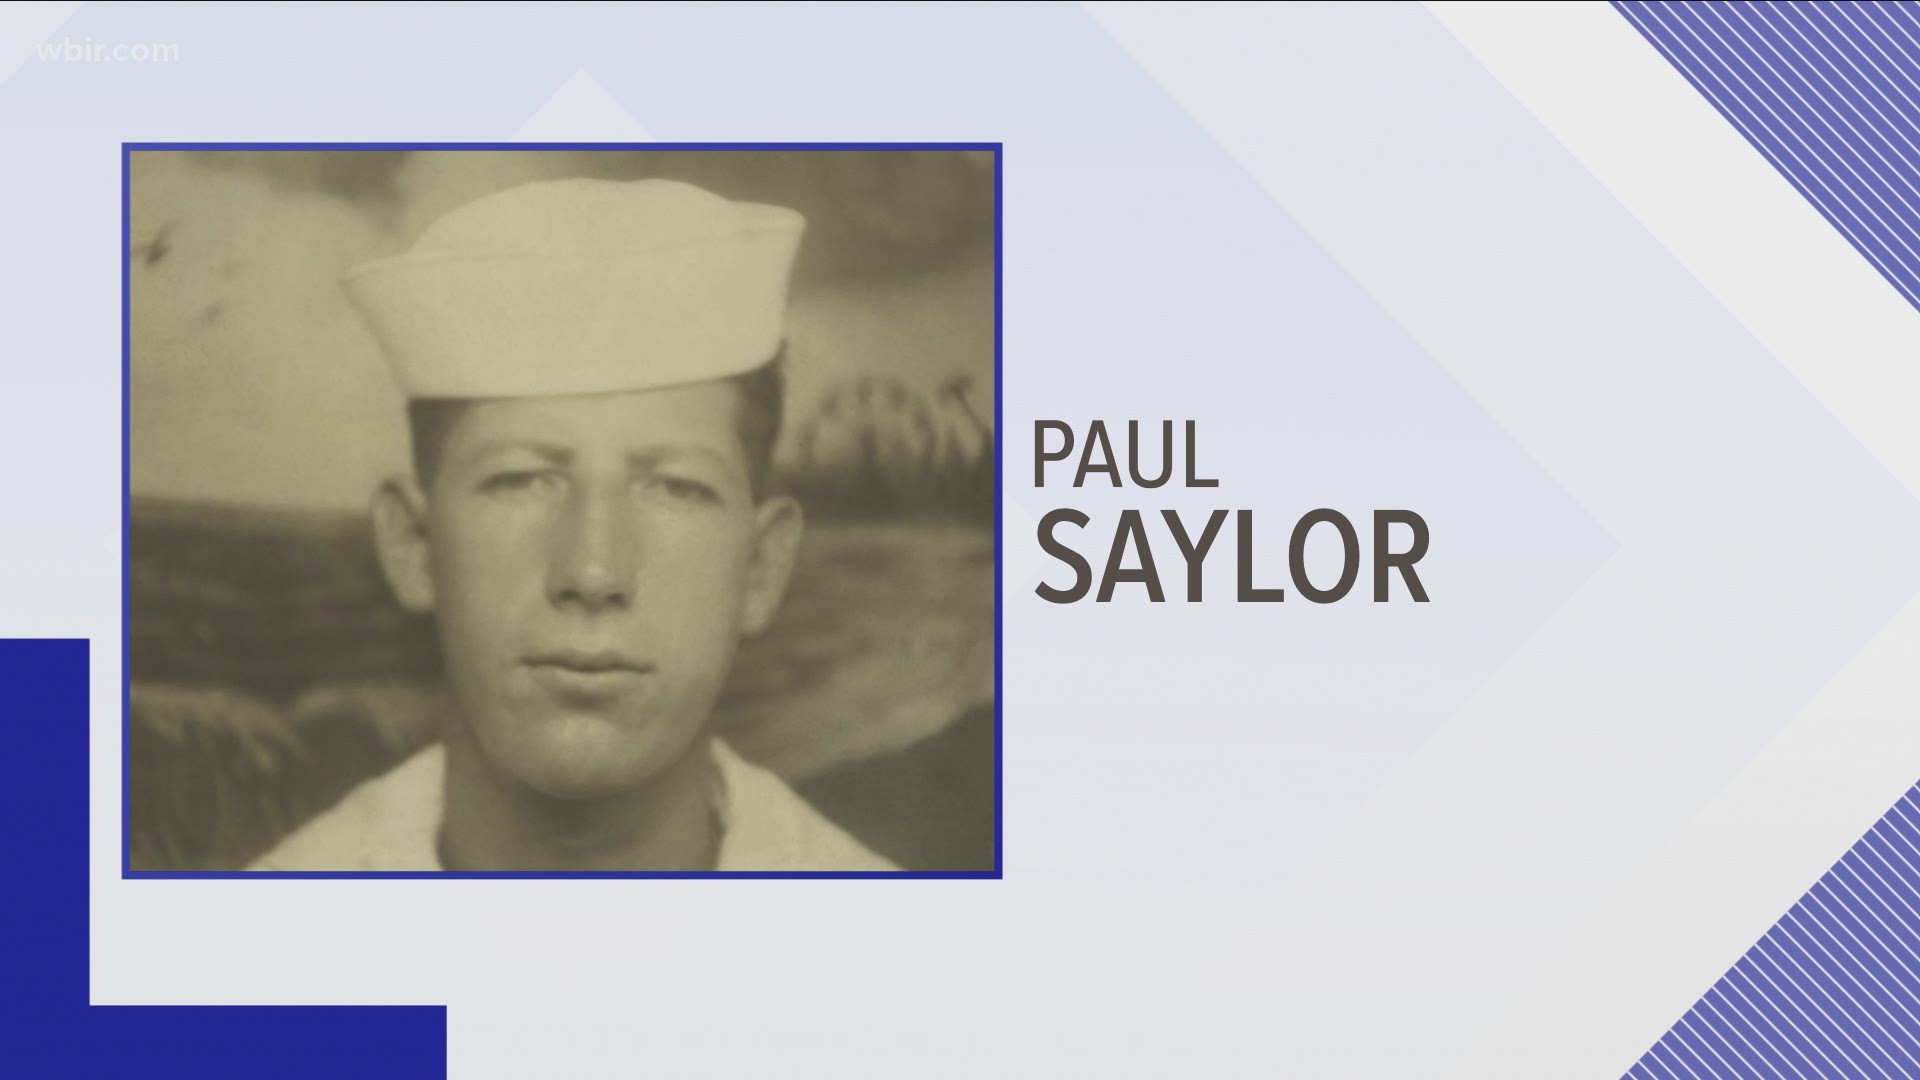 The Johnson City native was just 21 years old when the battleship USS Oklahoma was attacked, killing him and 428 other crewmen.